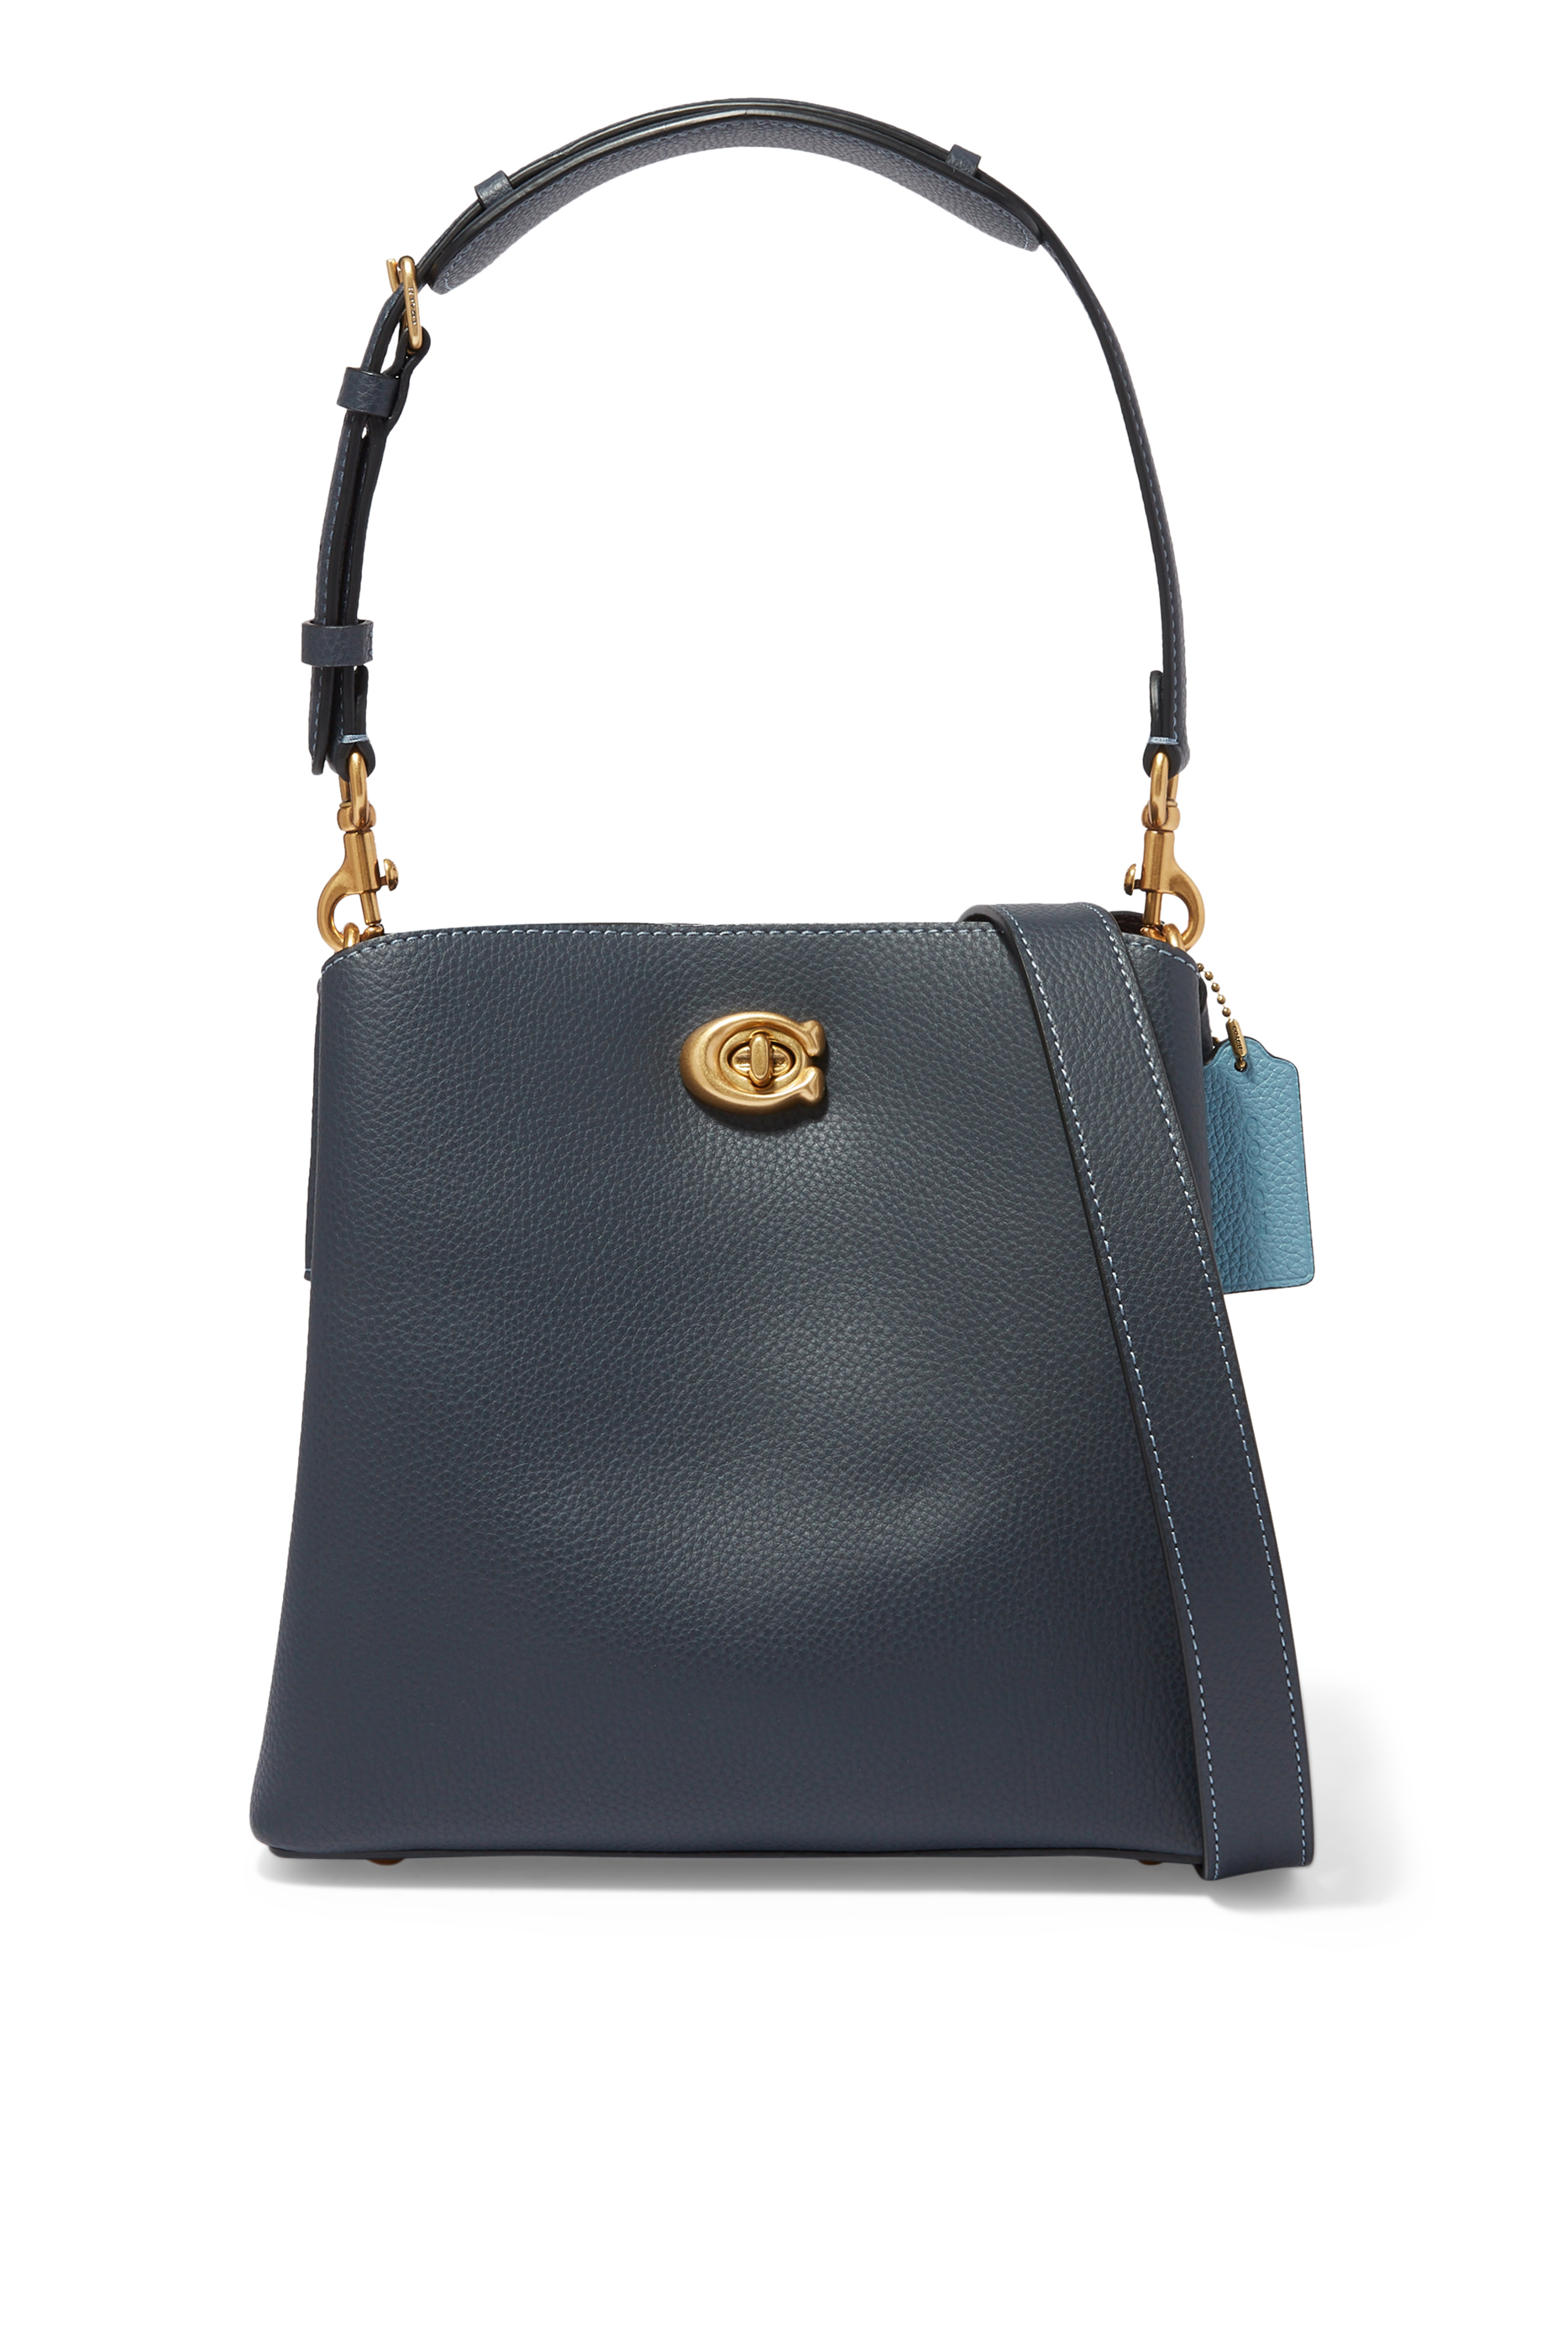 Buy Coach Willow Pebble Leather Bucket Bag for Womens | Bloomingdale's UAE